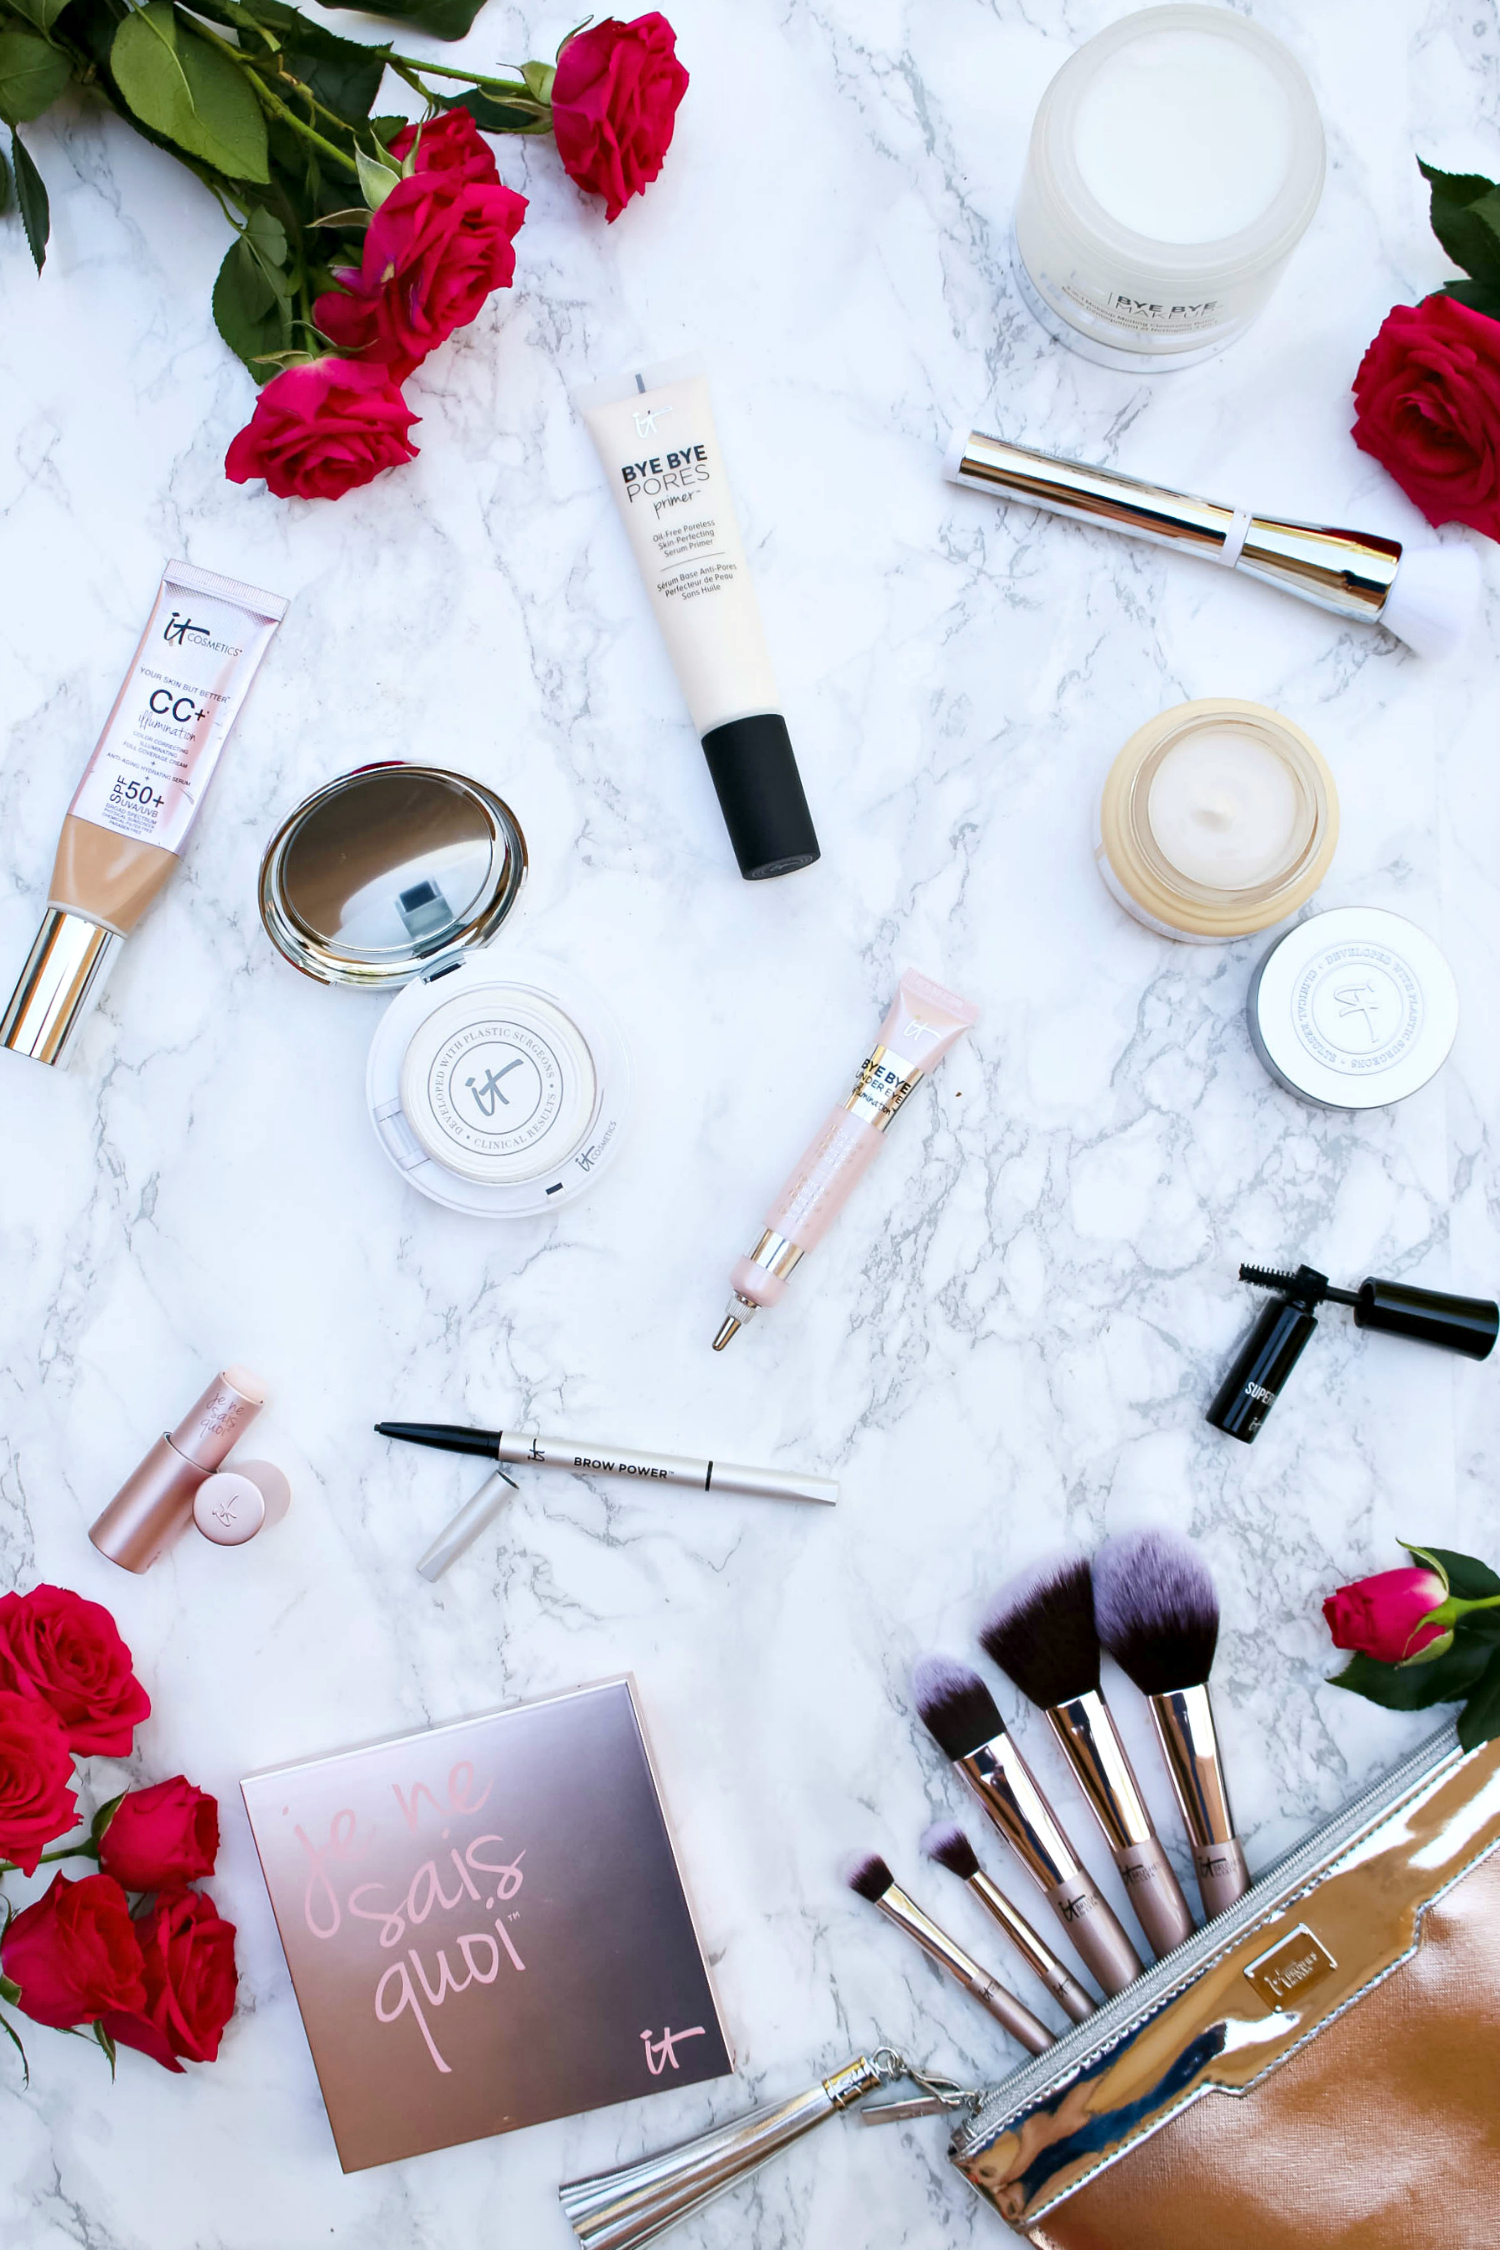 The top ten must-have It Cosmetics products for 2017